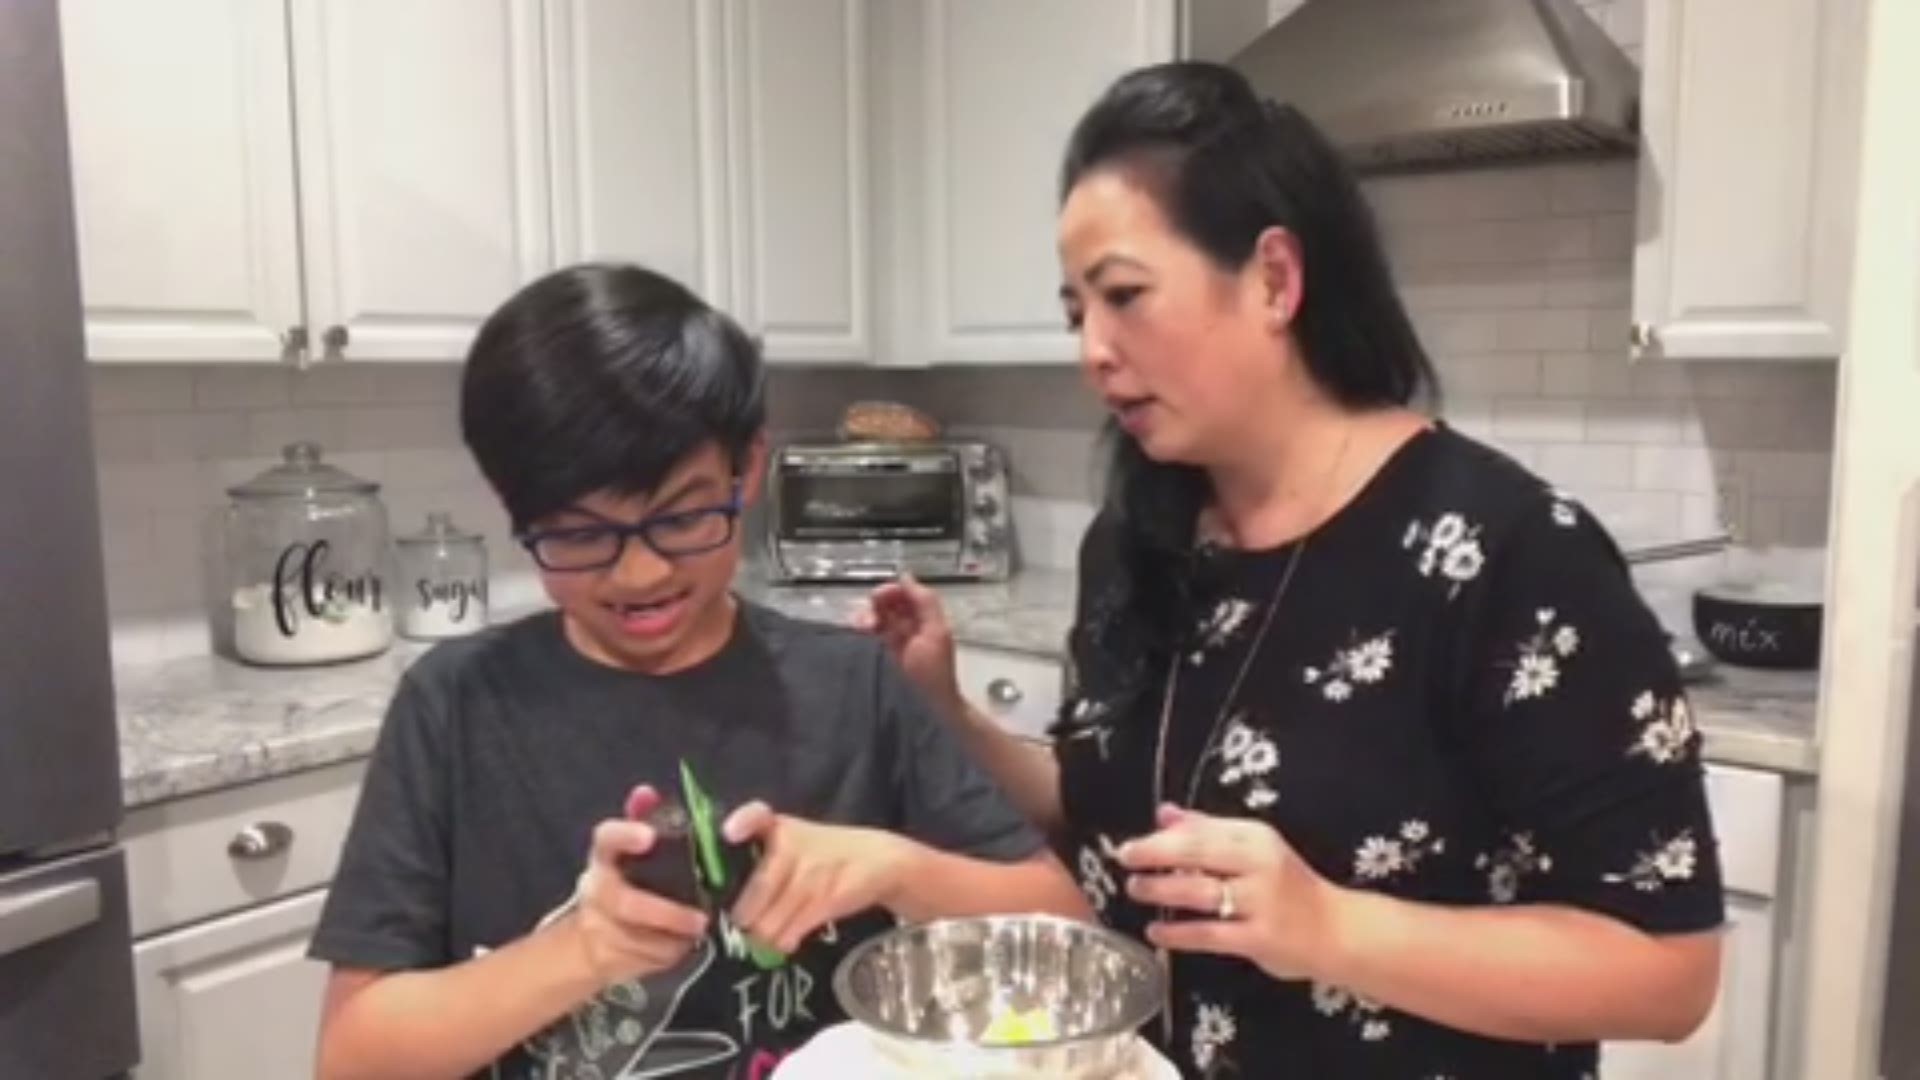 The slicer was only $10 and looked promising. So, we recruited help from Christine Nguyen in Sugar Land.